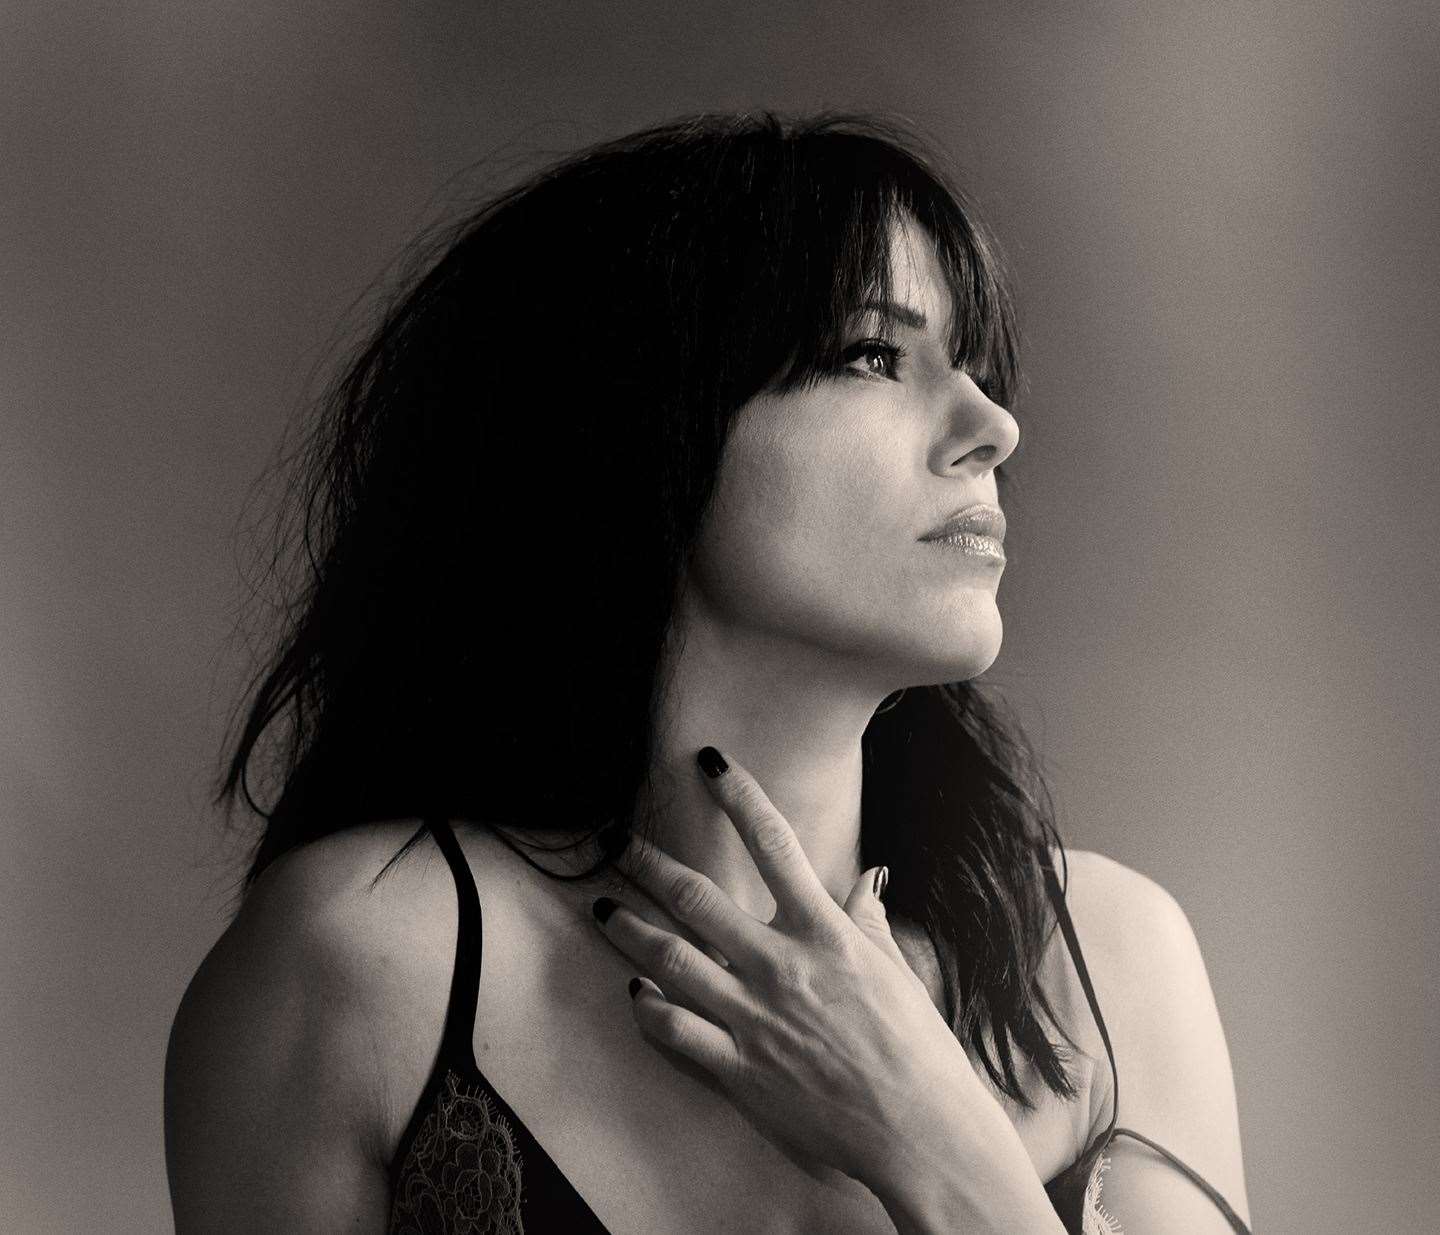 Singer Imelda May is on the line-up